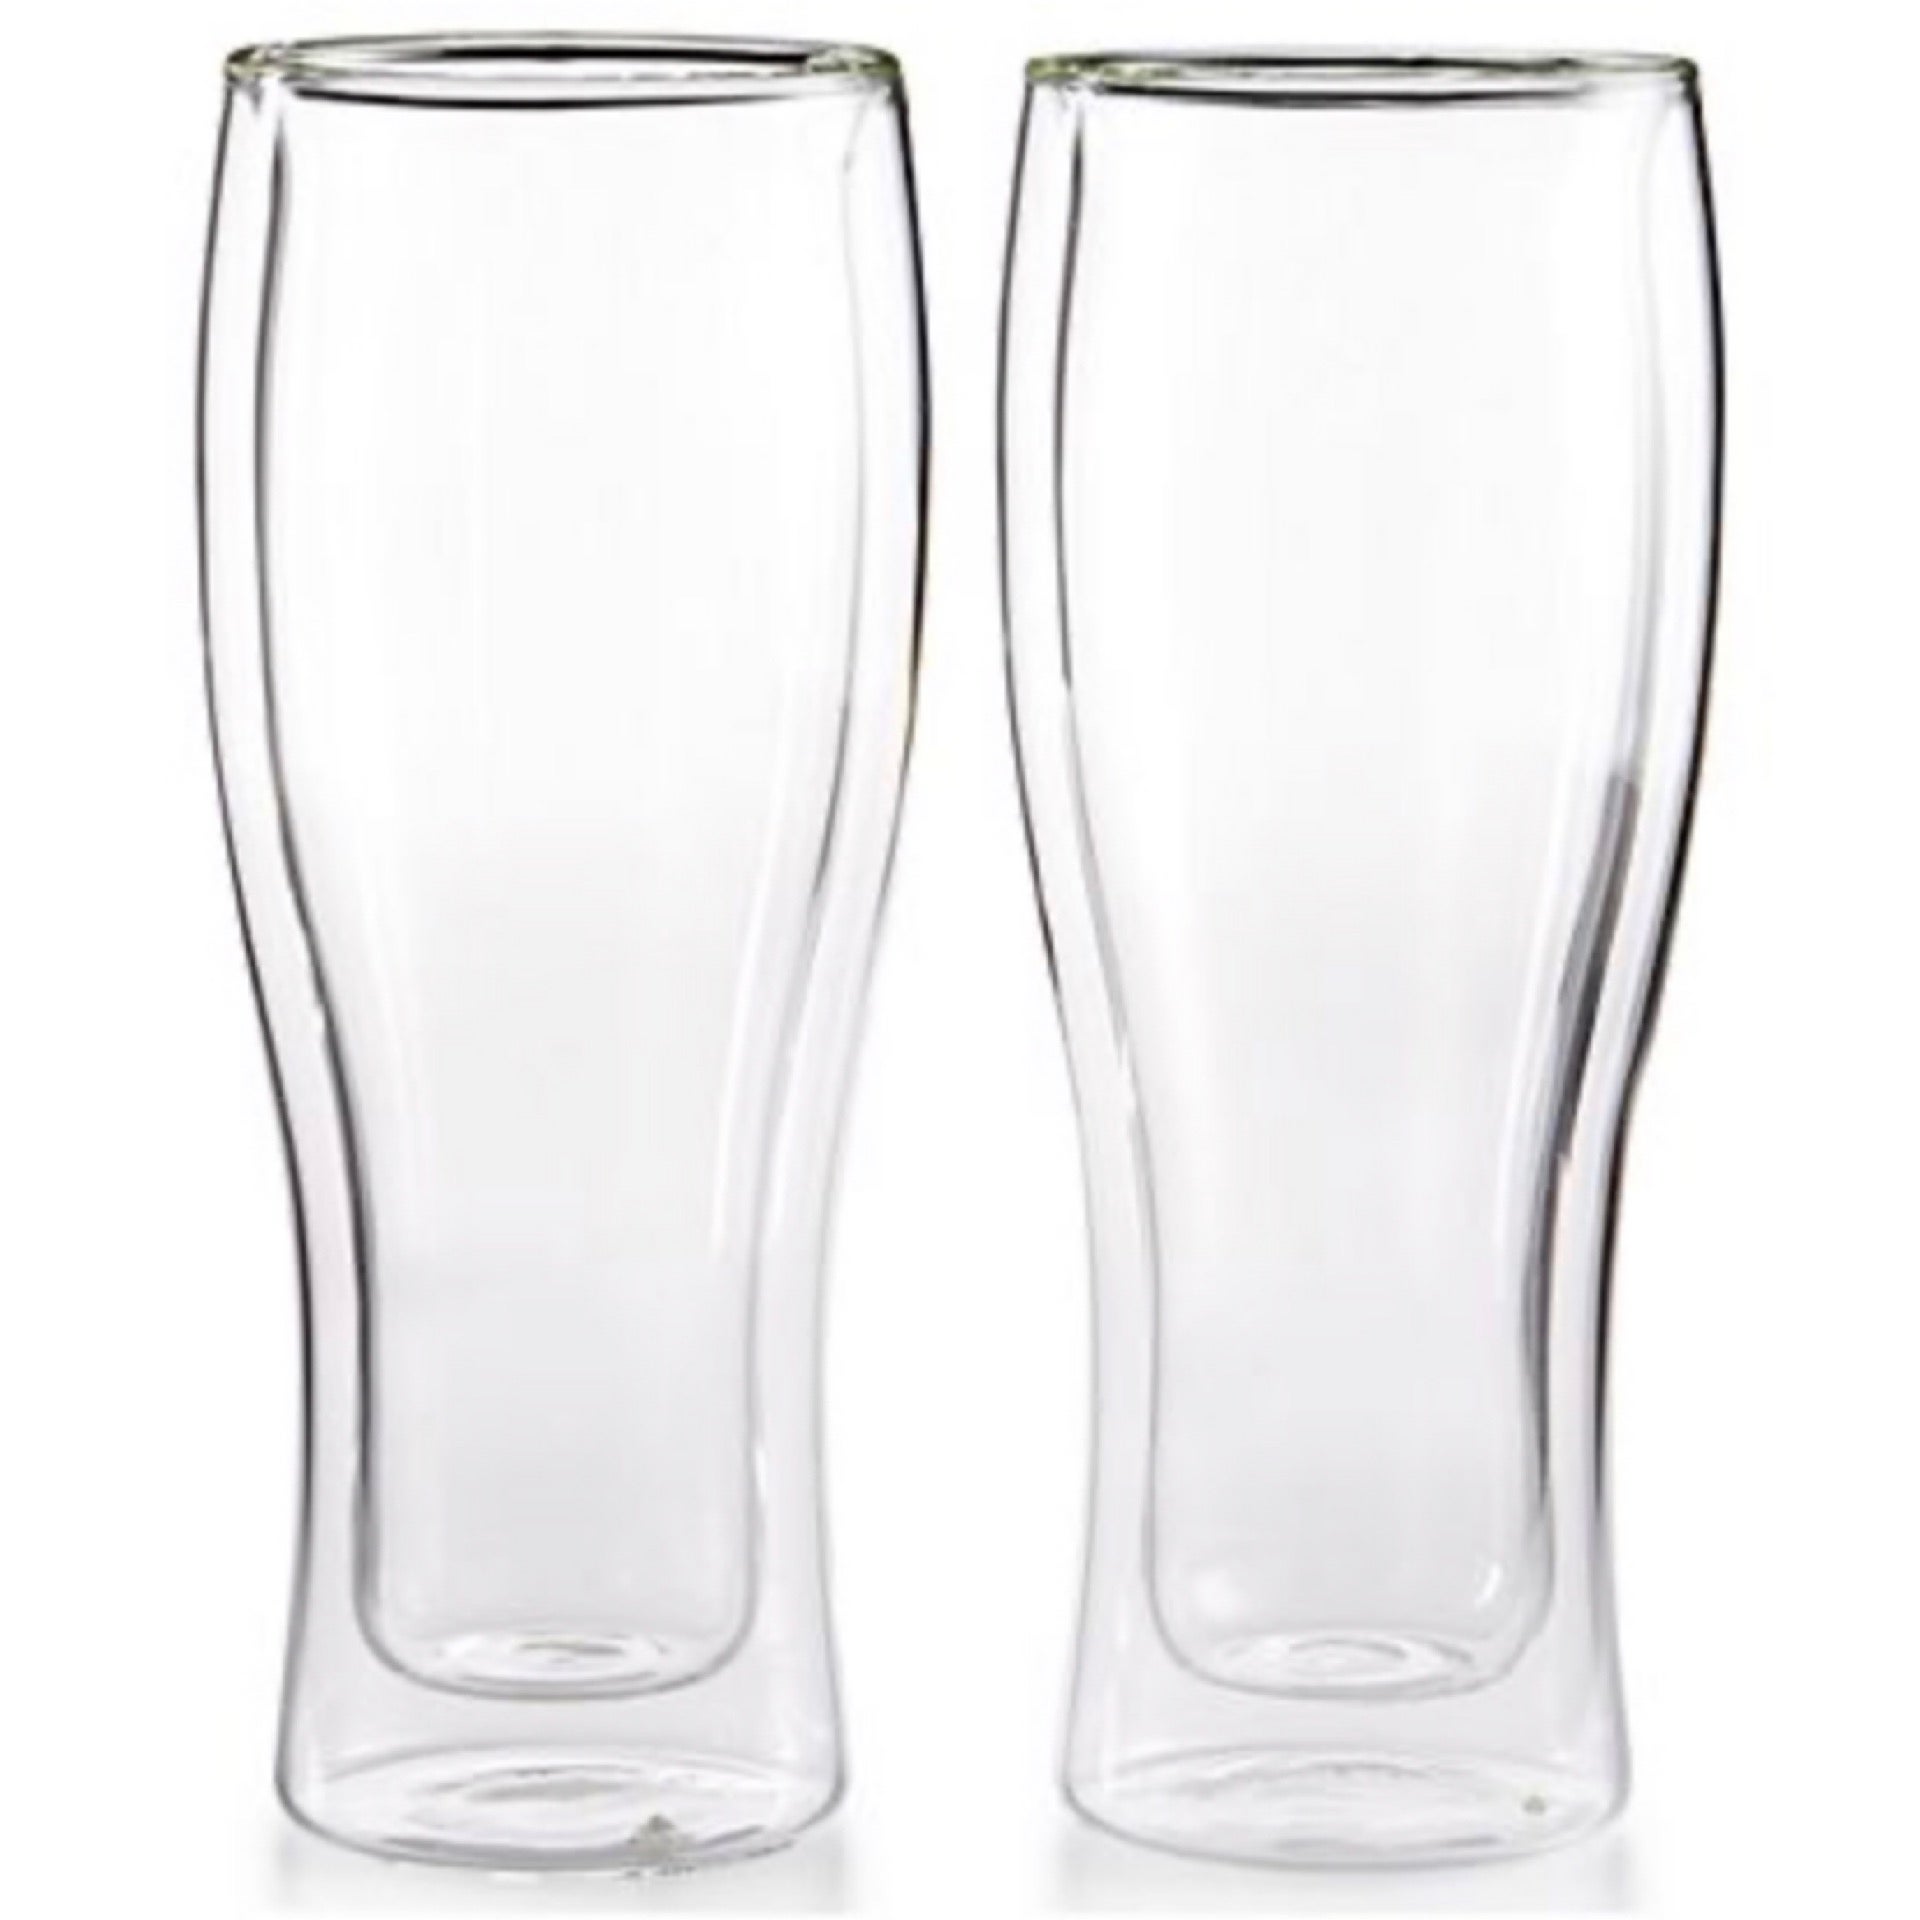 Zwilling Sorrento Double Wall Glassware 2-pc, Beer Glass Set